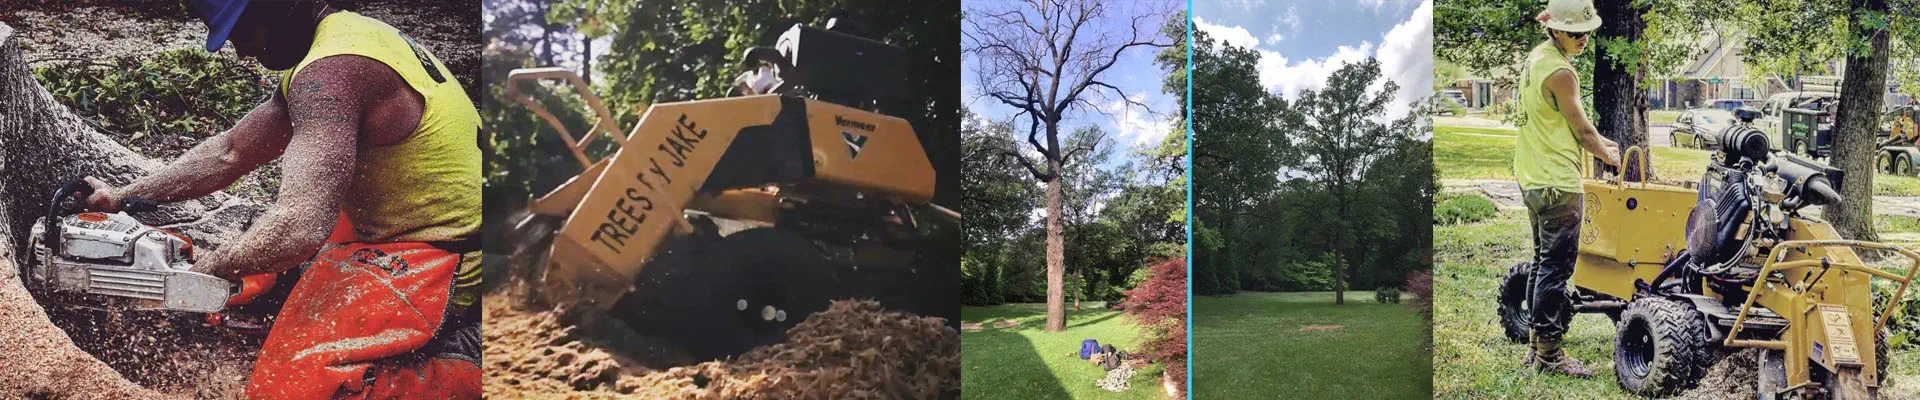 A collage of tree services images with various stump grinding and stump grinding equipment.